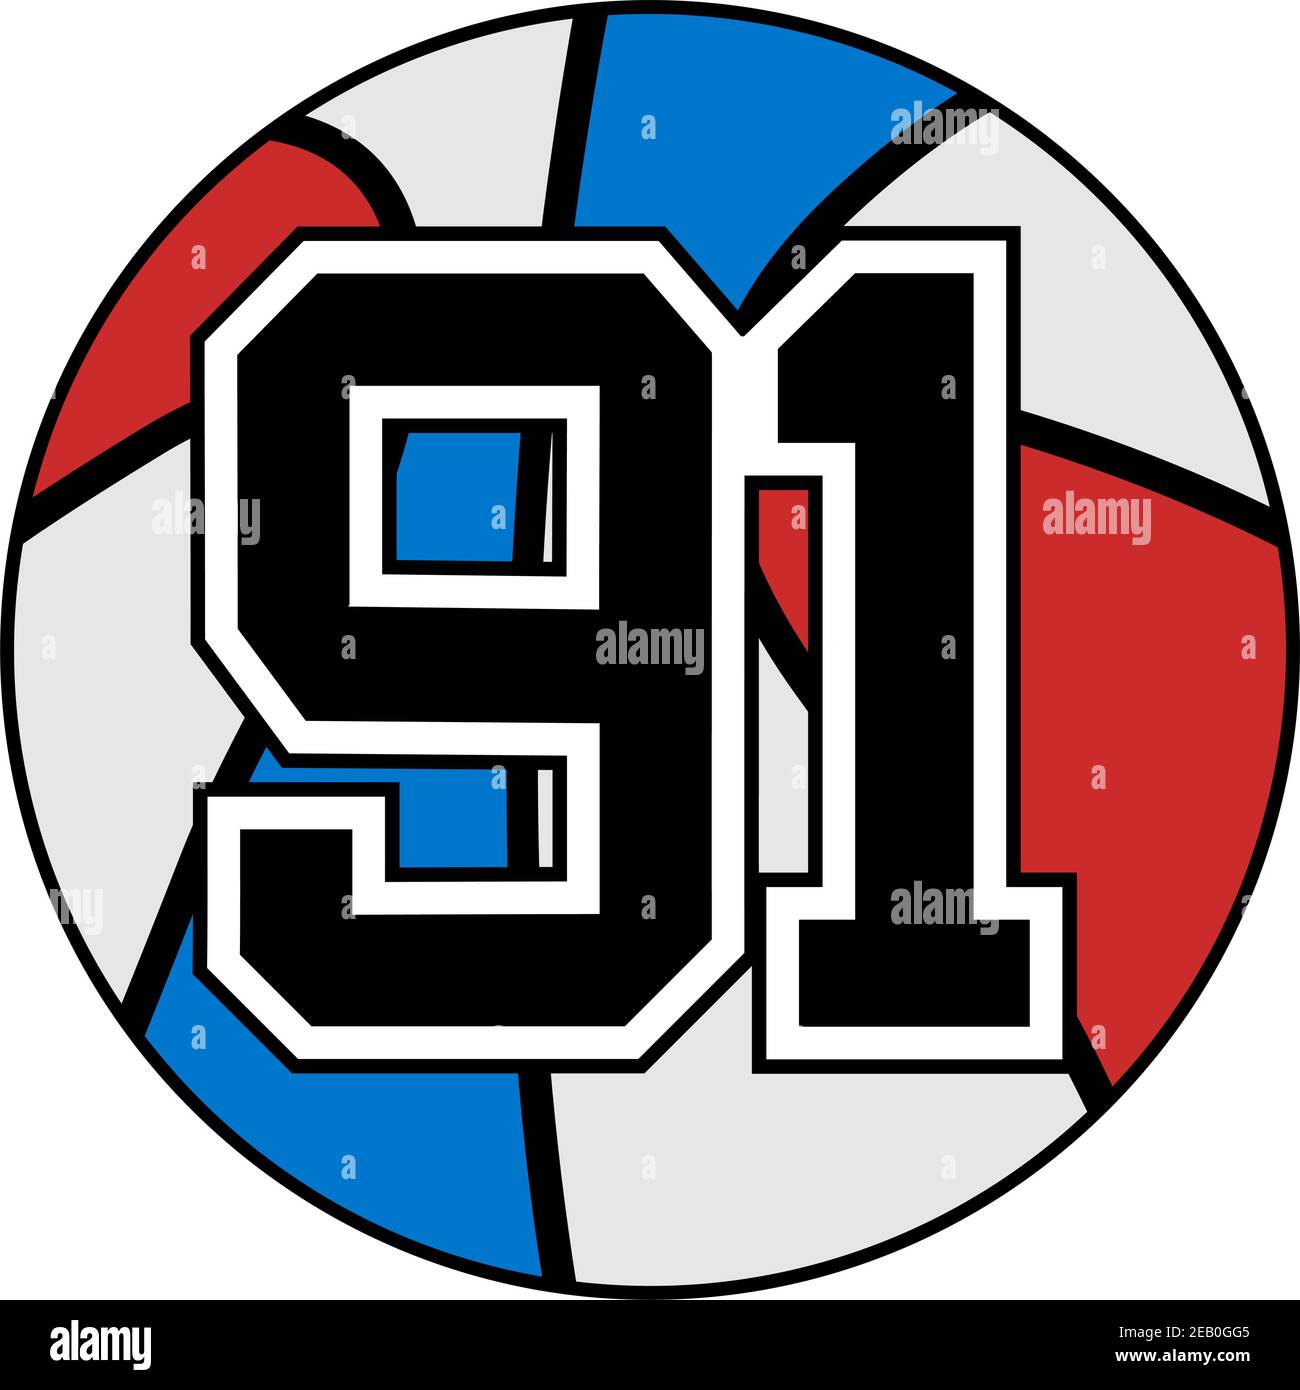 ball of basketball with the number 91 Stock Vector